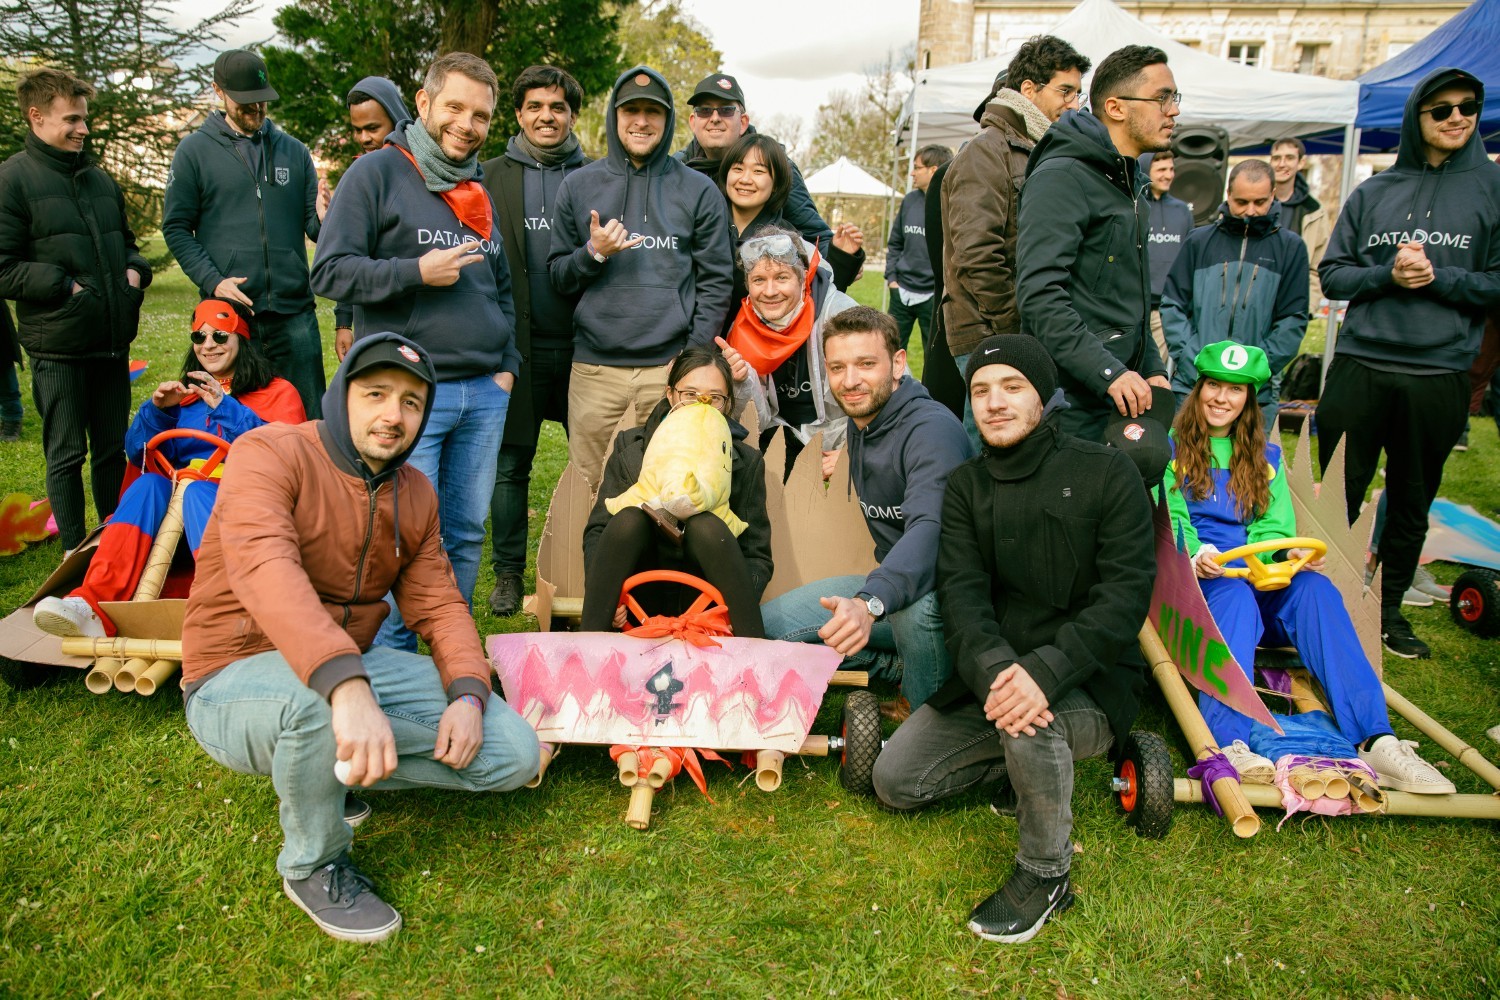 Our 2022 offsite included team building activities, such as making go karts and racing them across a wine field.